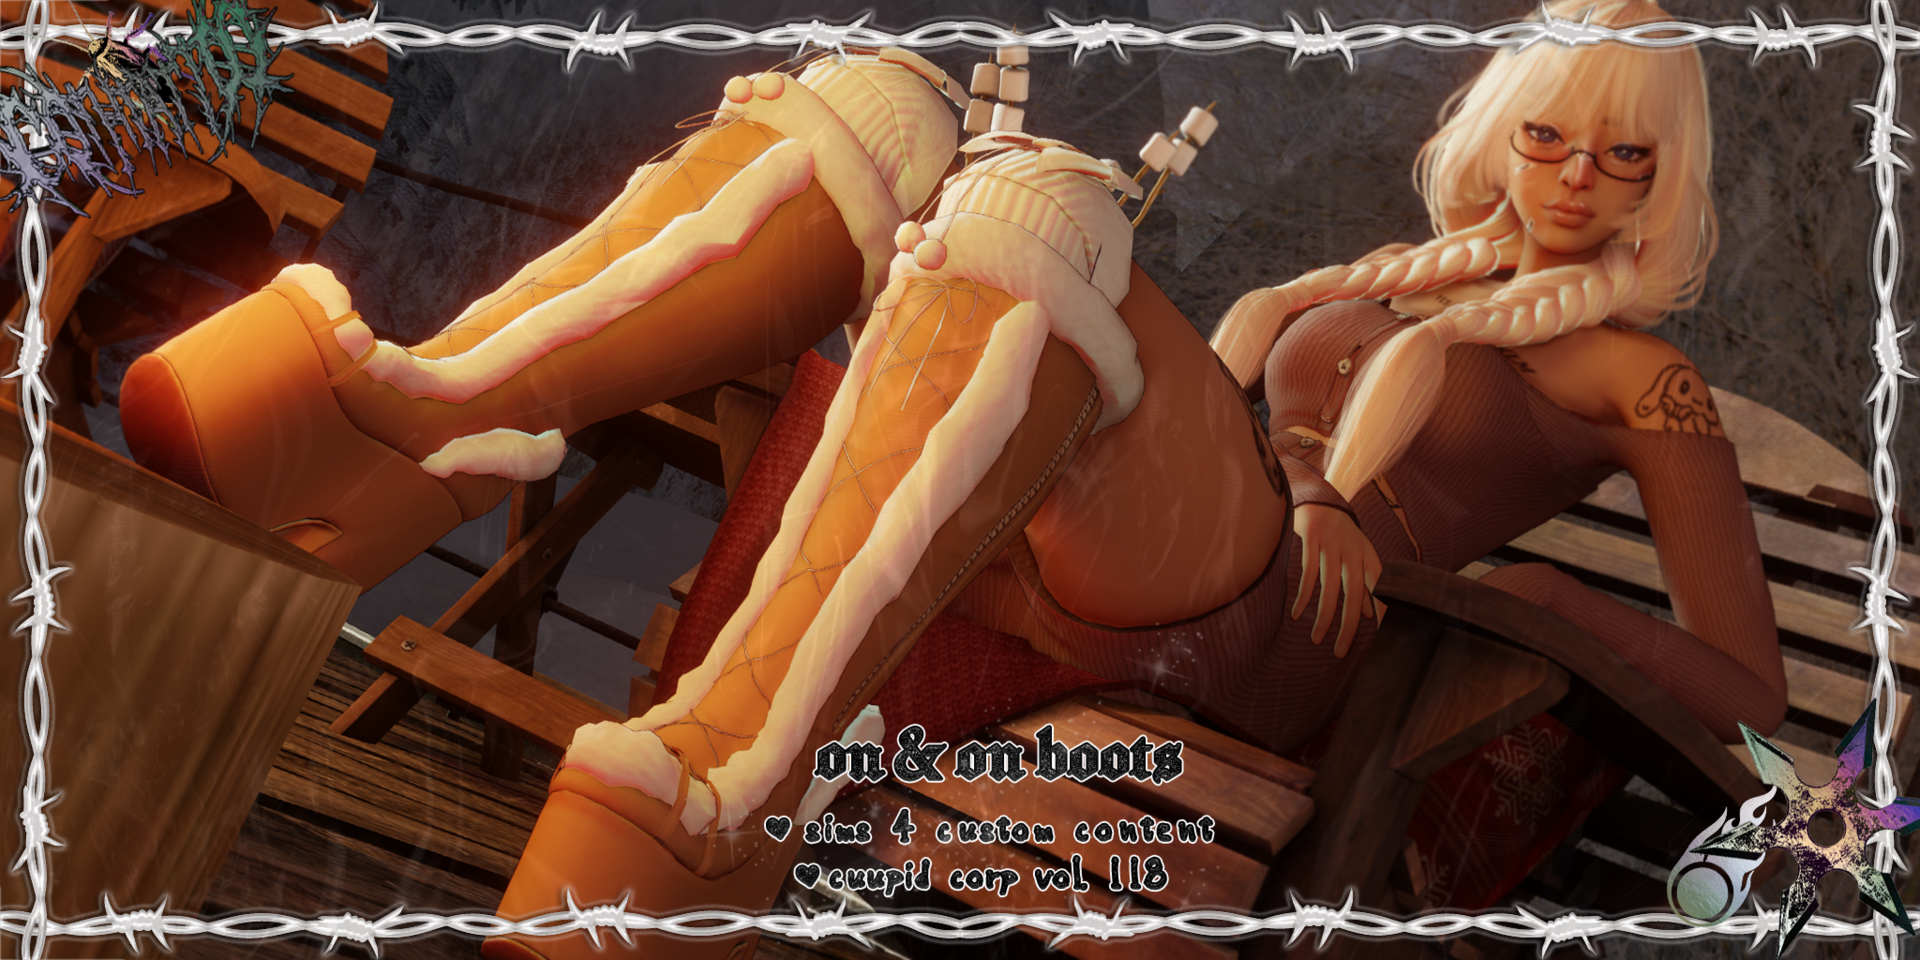 ononbootspreview.thumb.png.b3845bef6852e048cba55c8c5dbf57a7.png